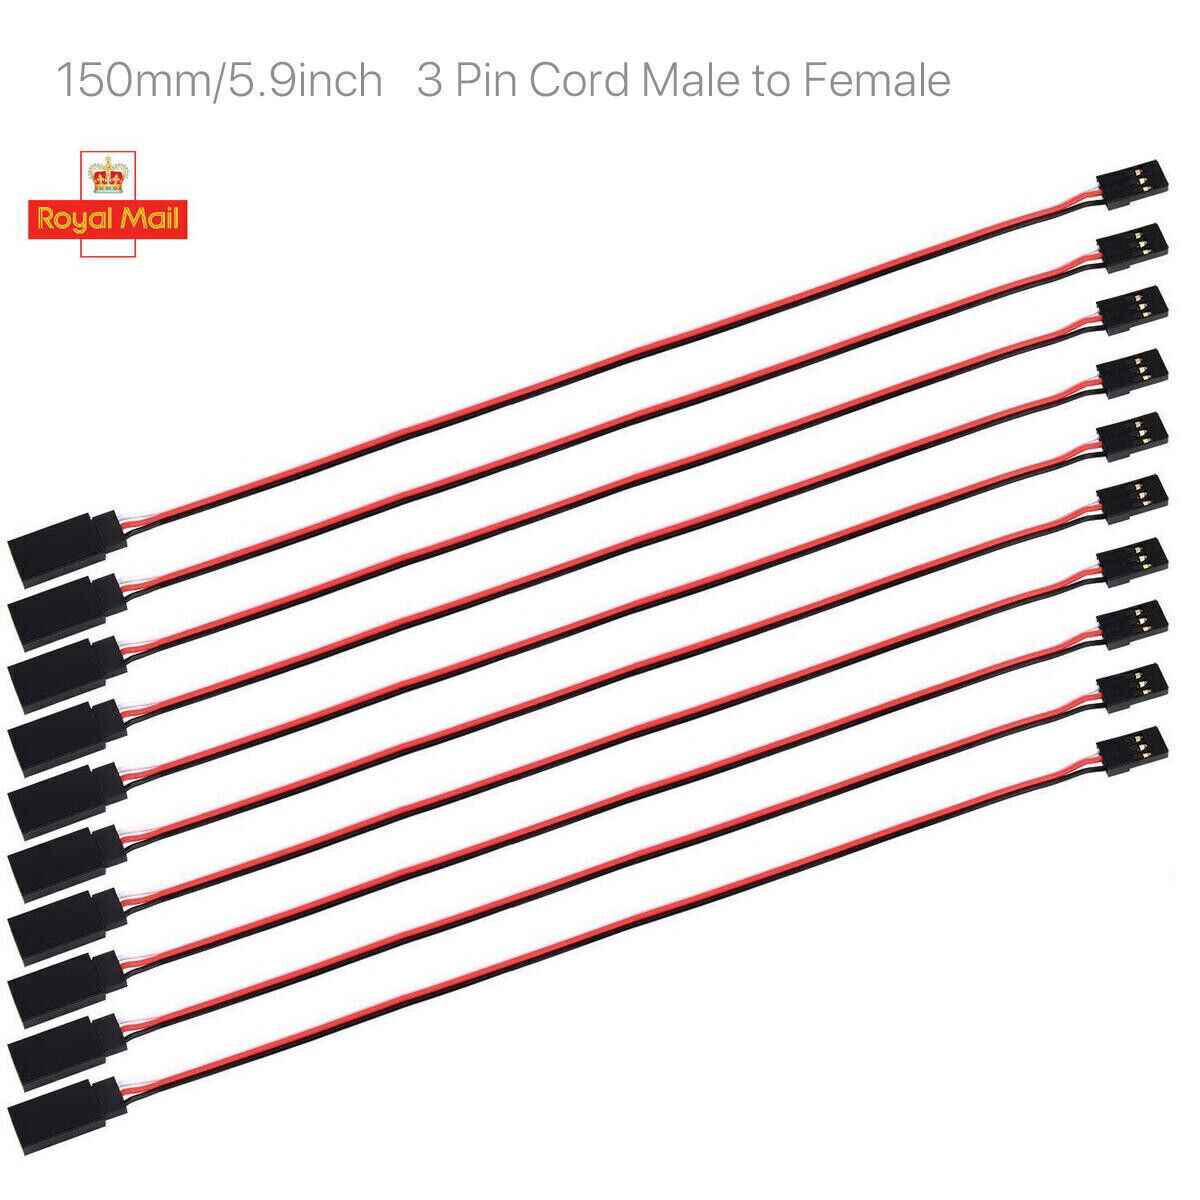 10 Pcs Servo Extension Lead Wire Cable 3 Pin Male to Female 150mm for Futaba RC